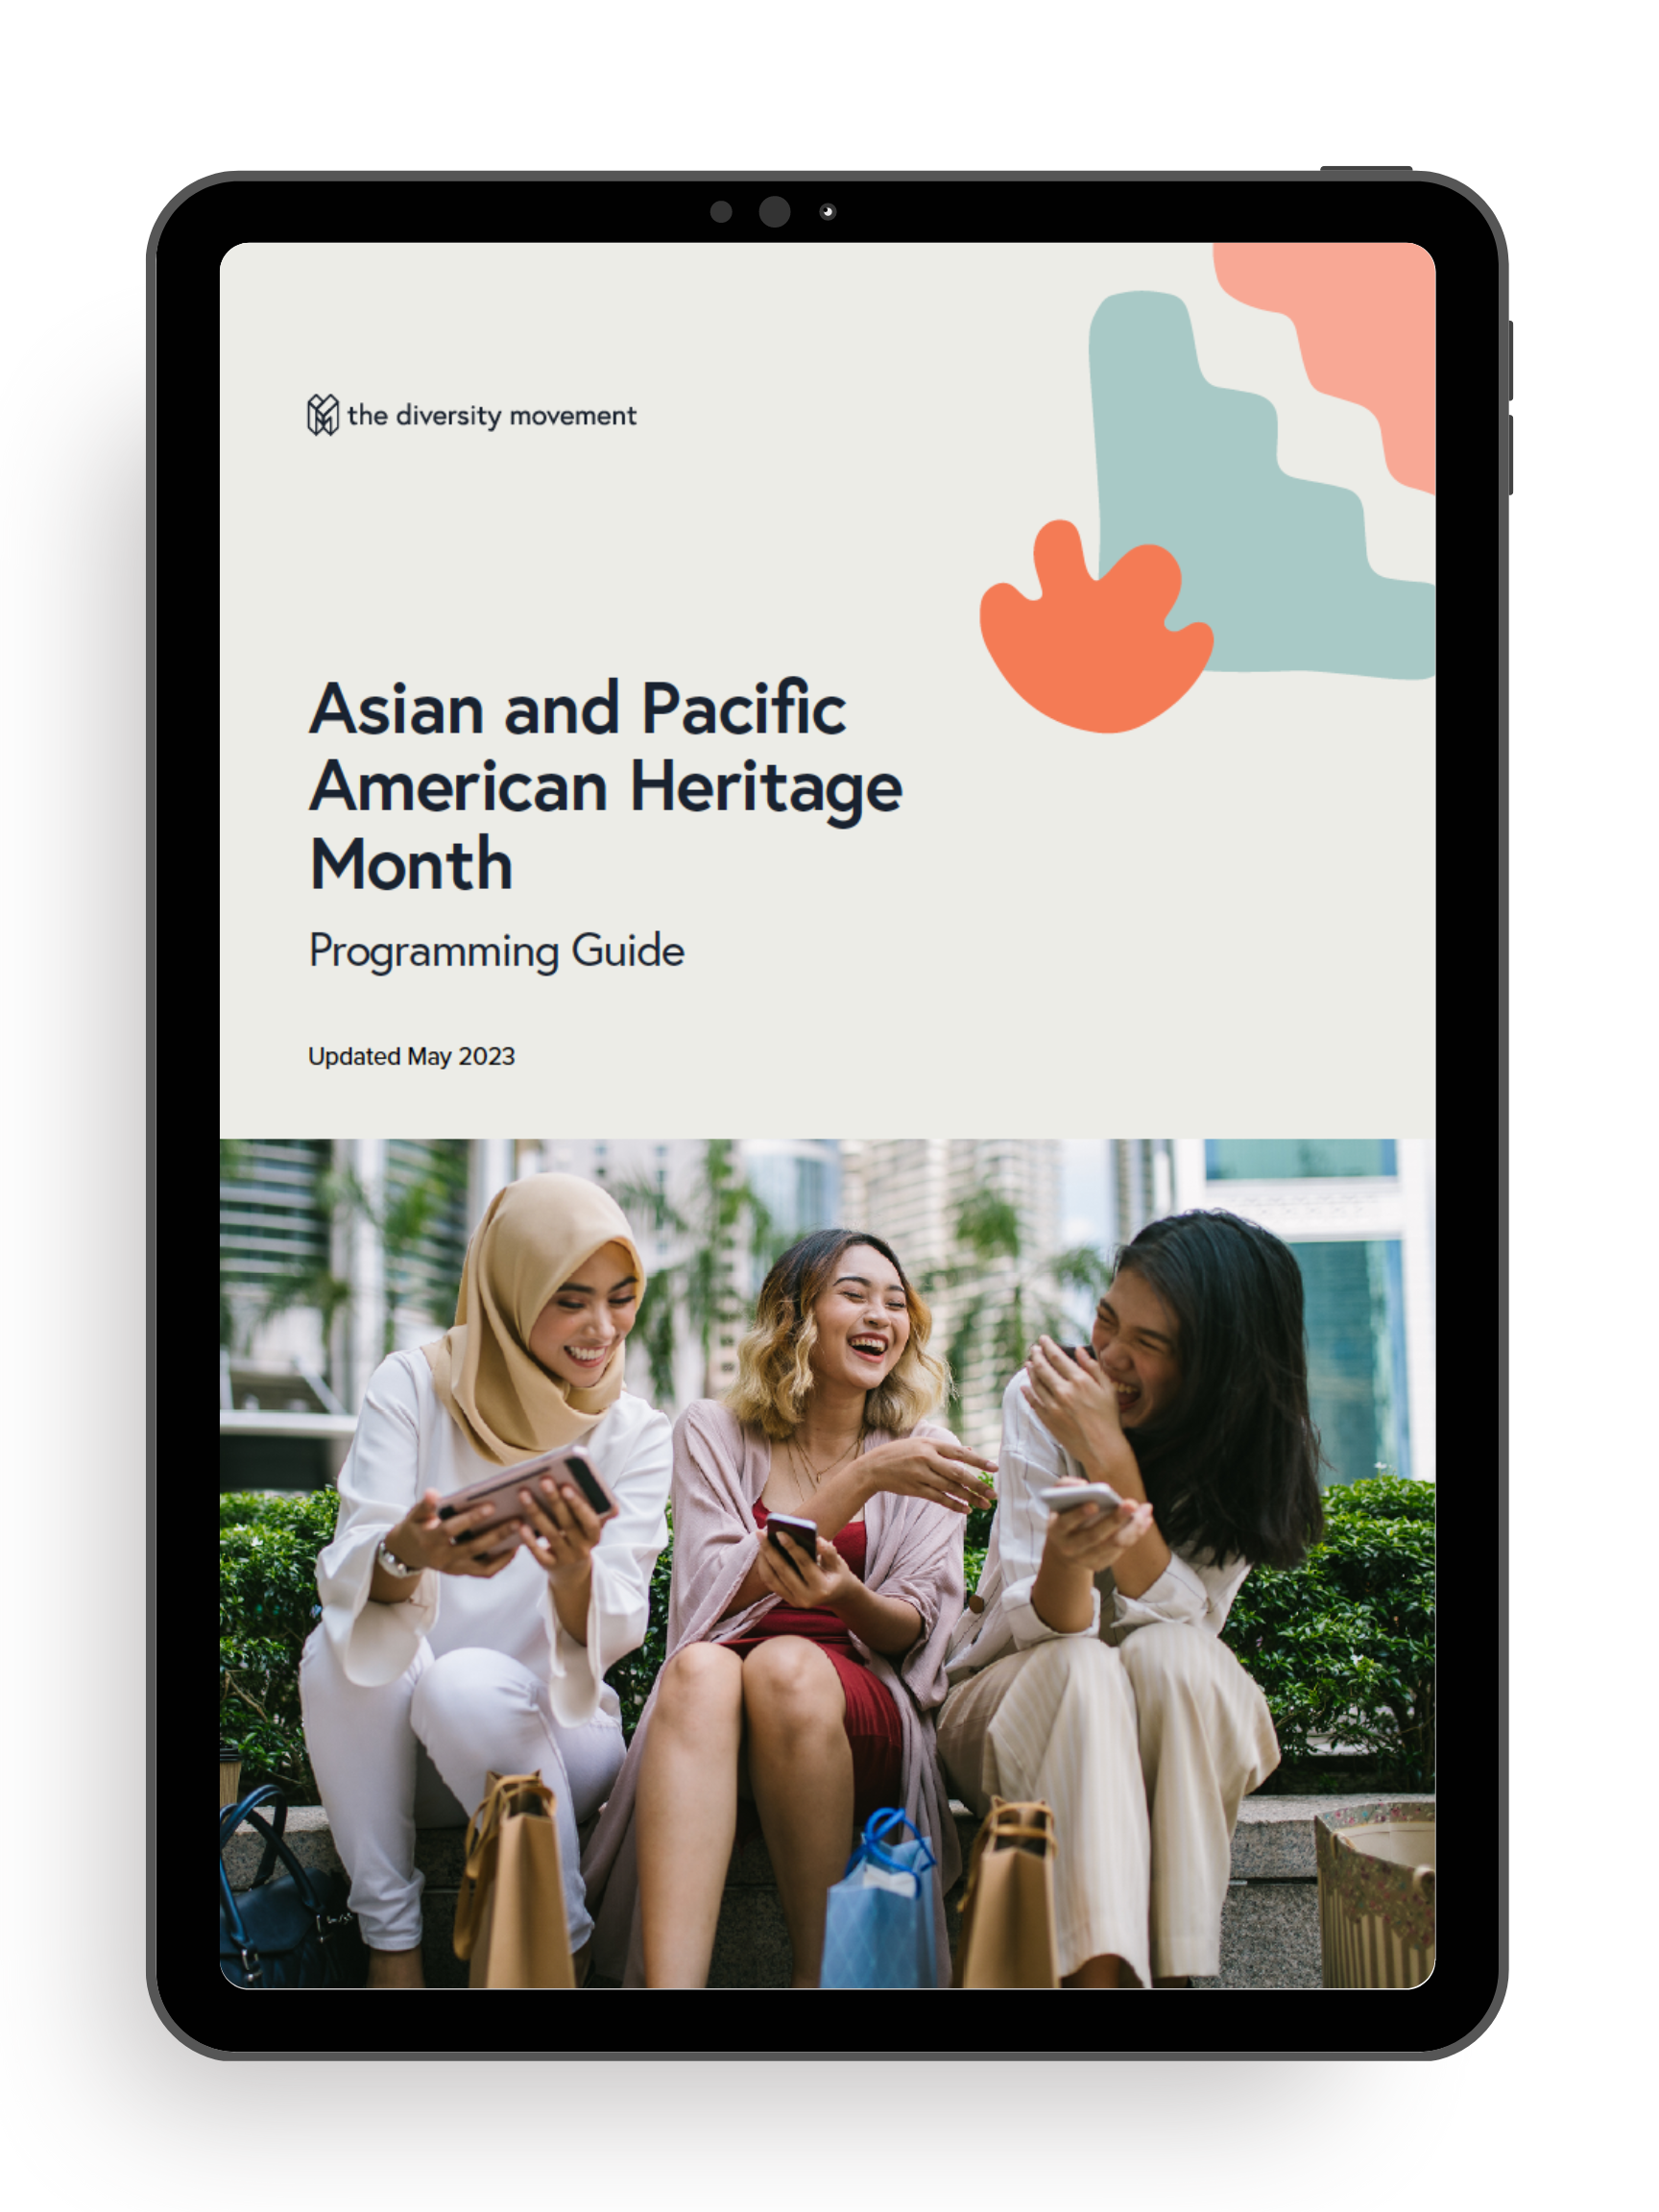 Asian American Pacific Islander Heritage Month programming guide on an ipad screen